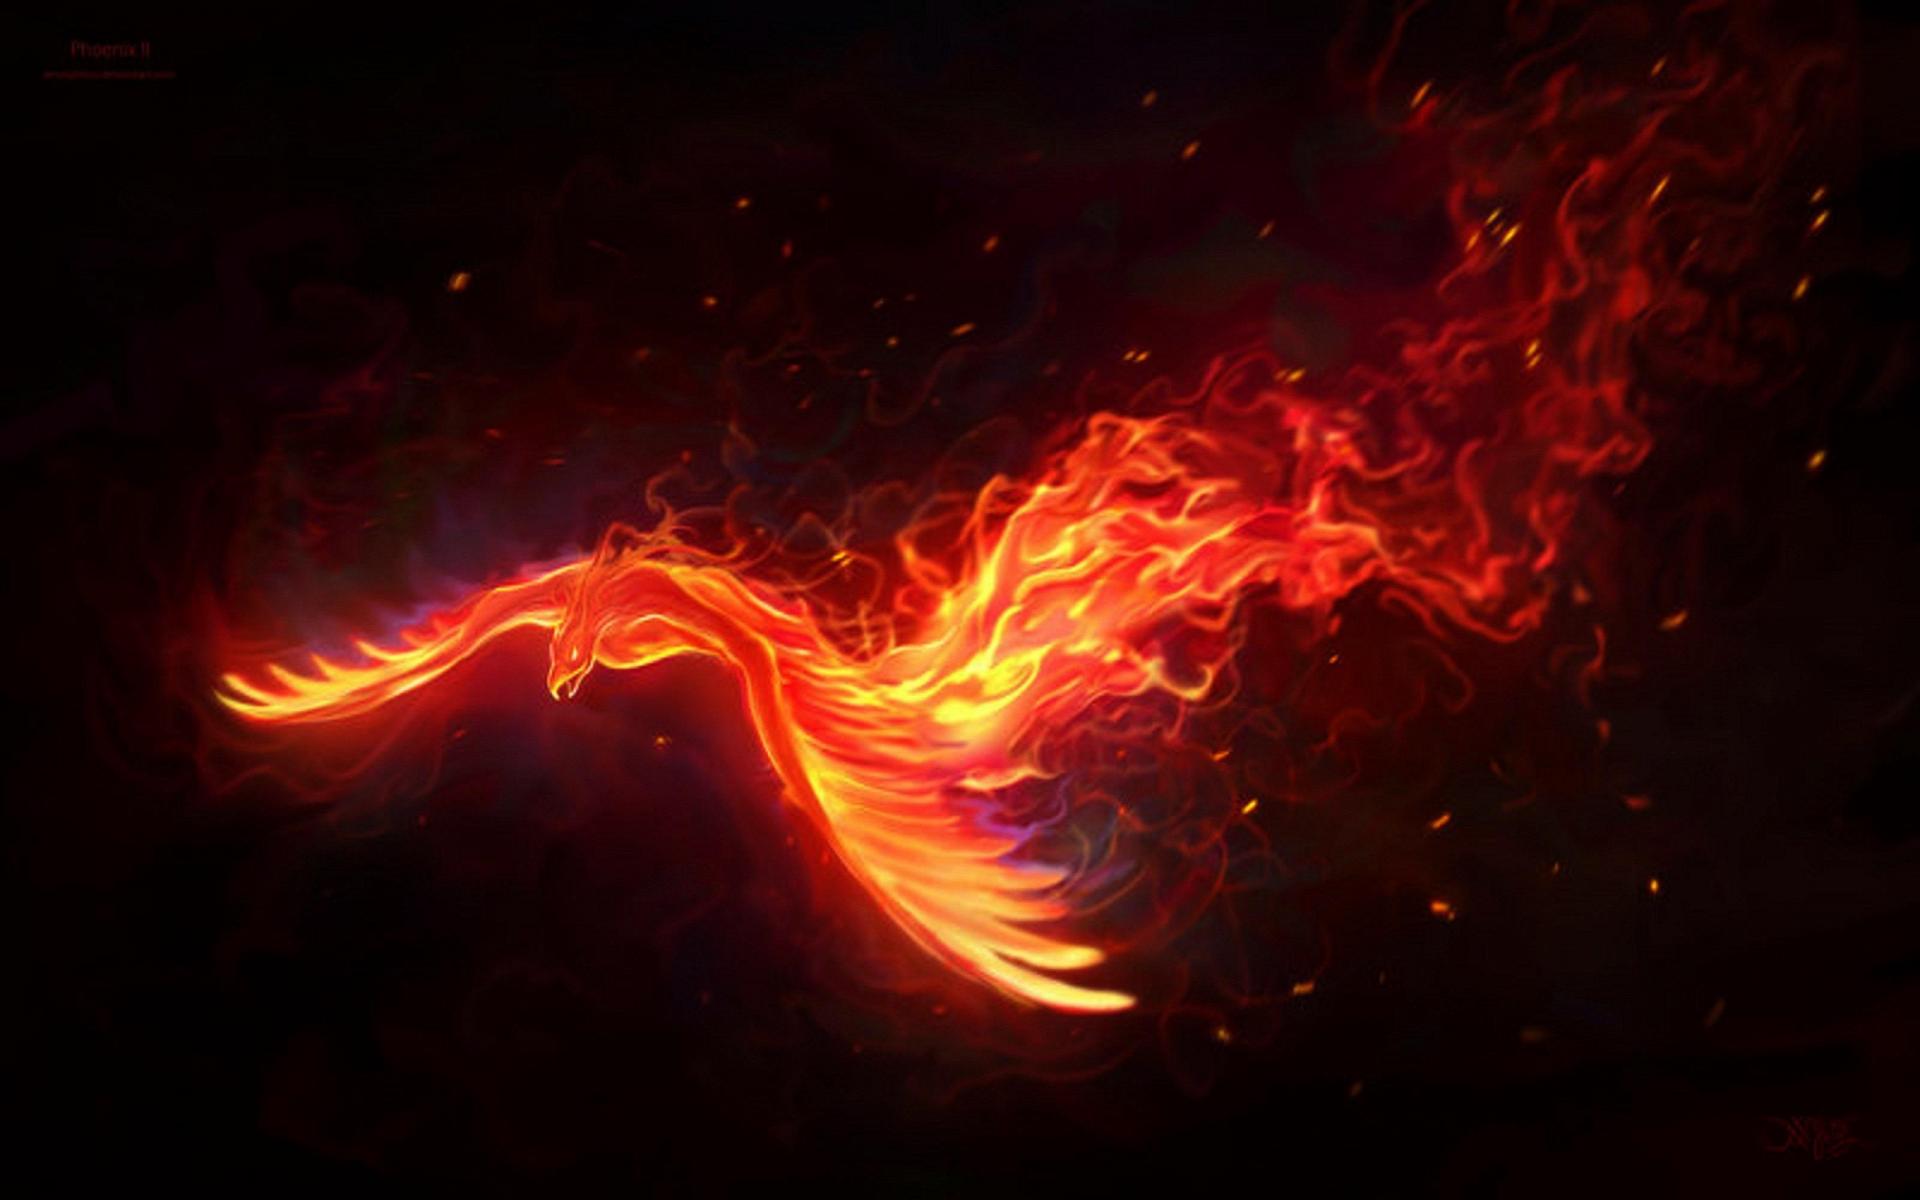 Fire Phoenix High Quality And Resolution Wallpaper On